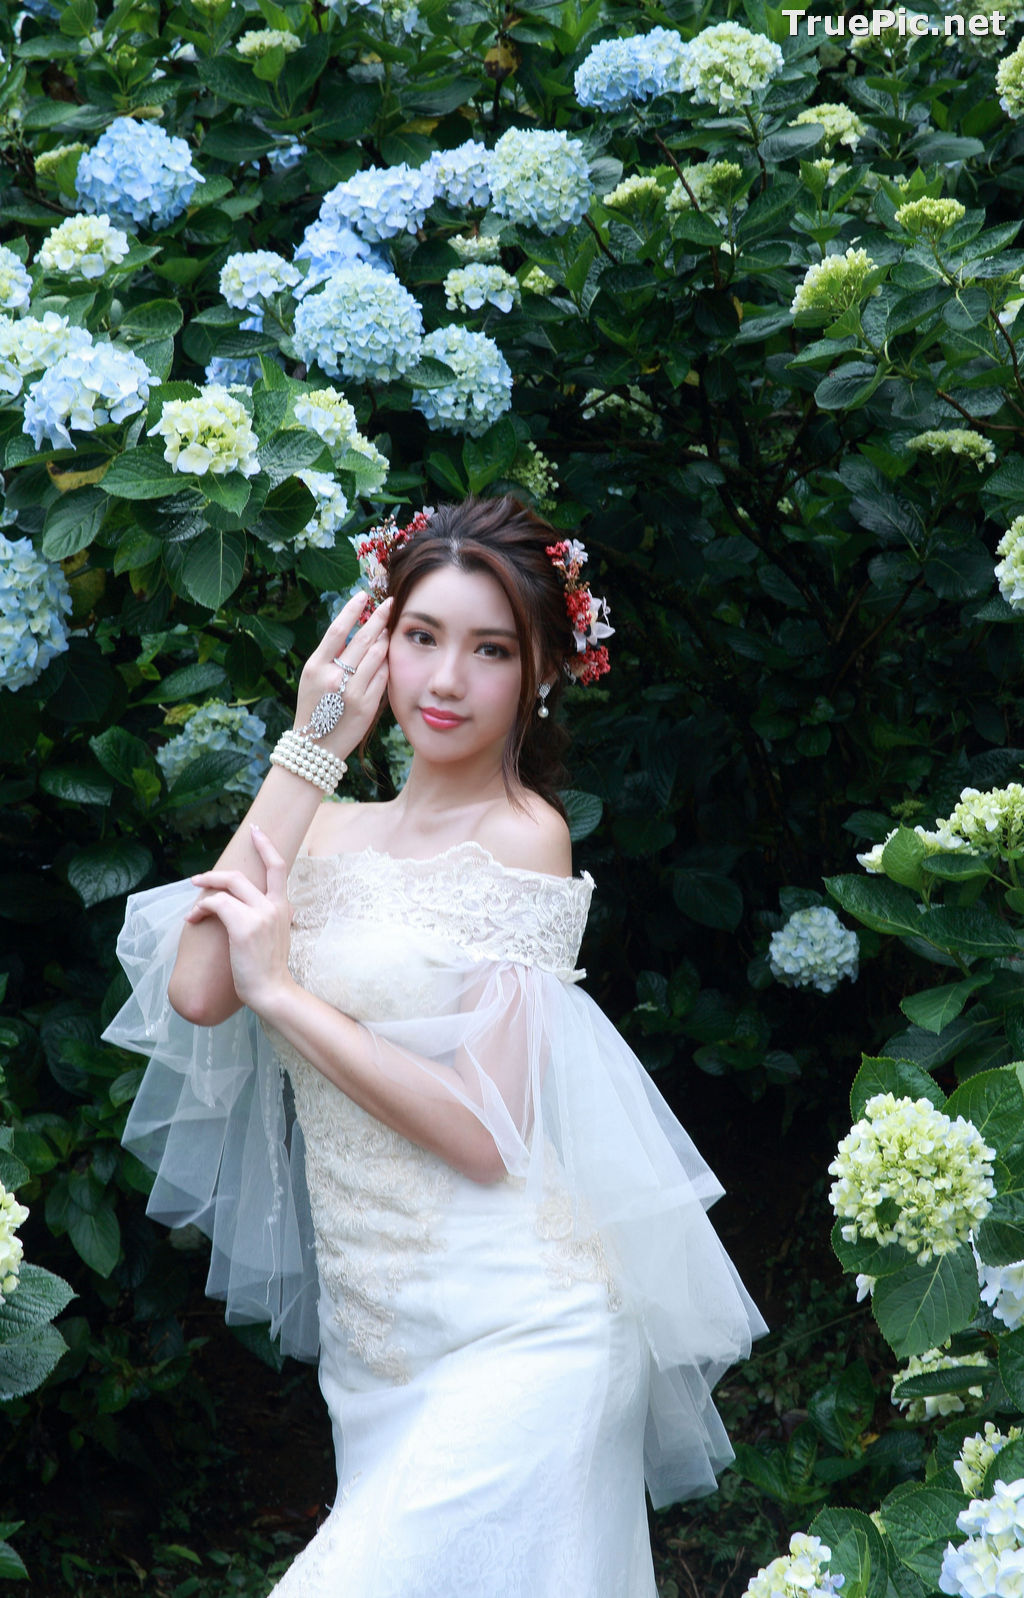 Image Taiwanese Model - 張倫甄 - Beautiful Bride and Hydrangea Flowers - TruePic.net - Picture-11